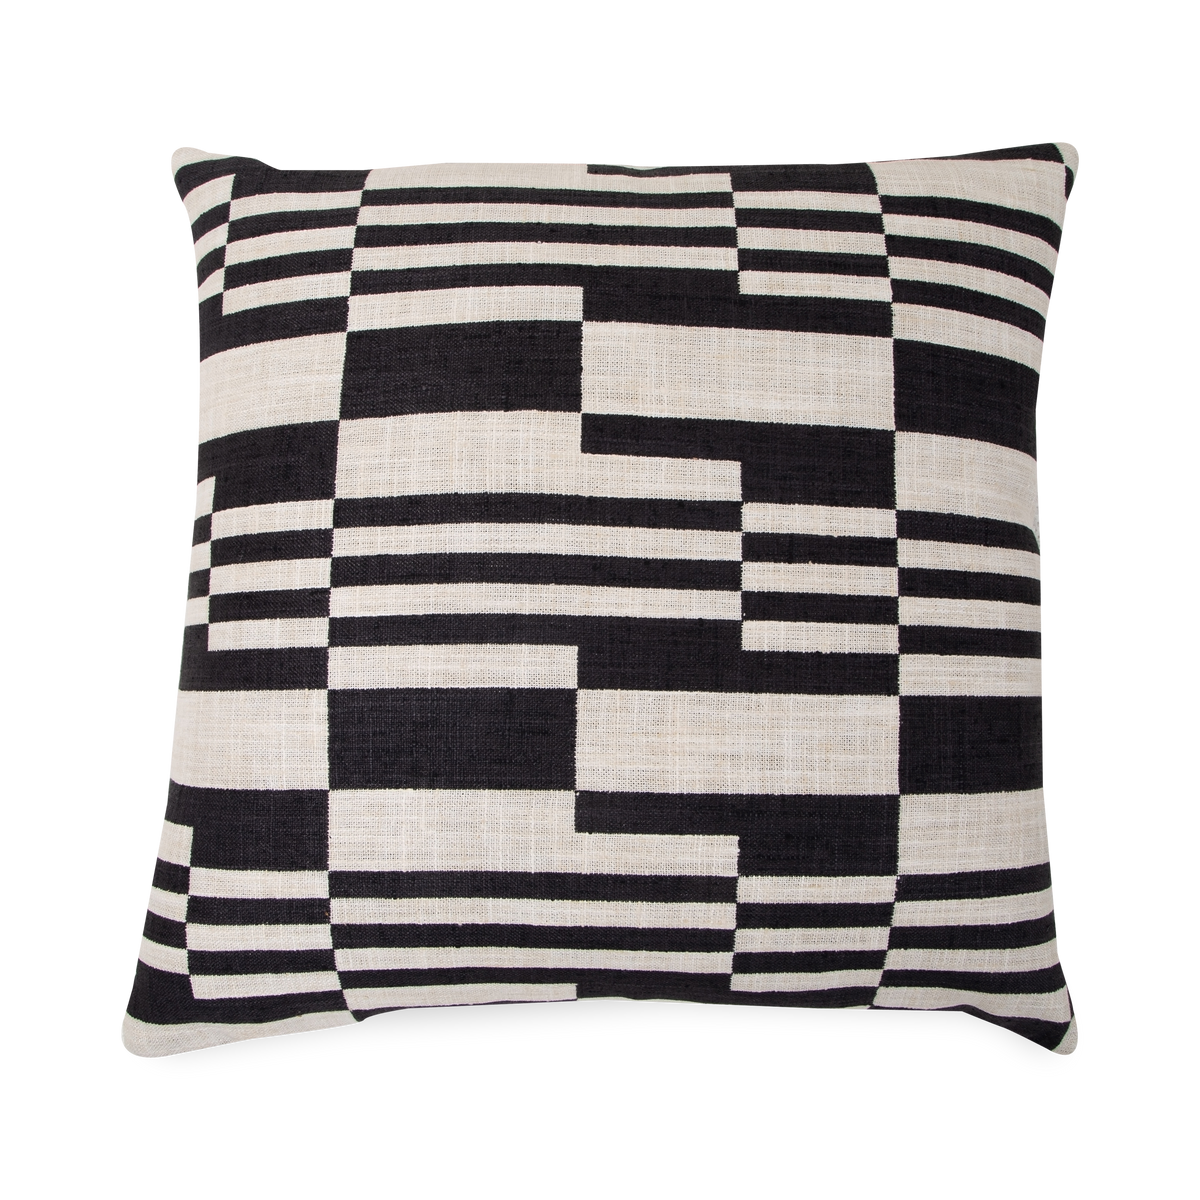 With a unique pattern of black lines and shapes on beige, the Domino Pillow is woven with a textured polyester, which is then finished with a knife-edge style.